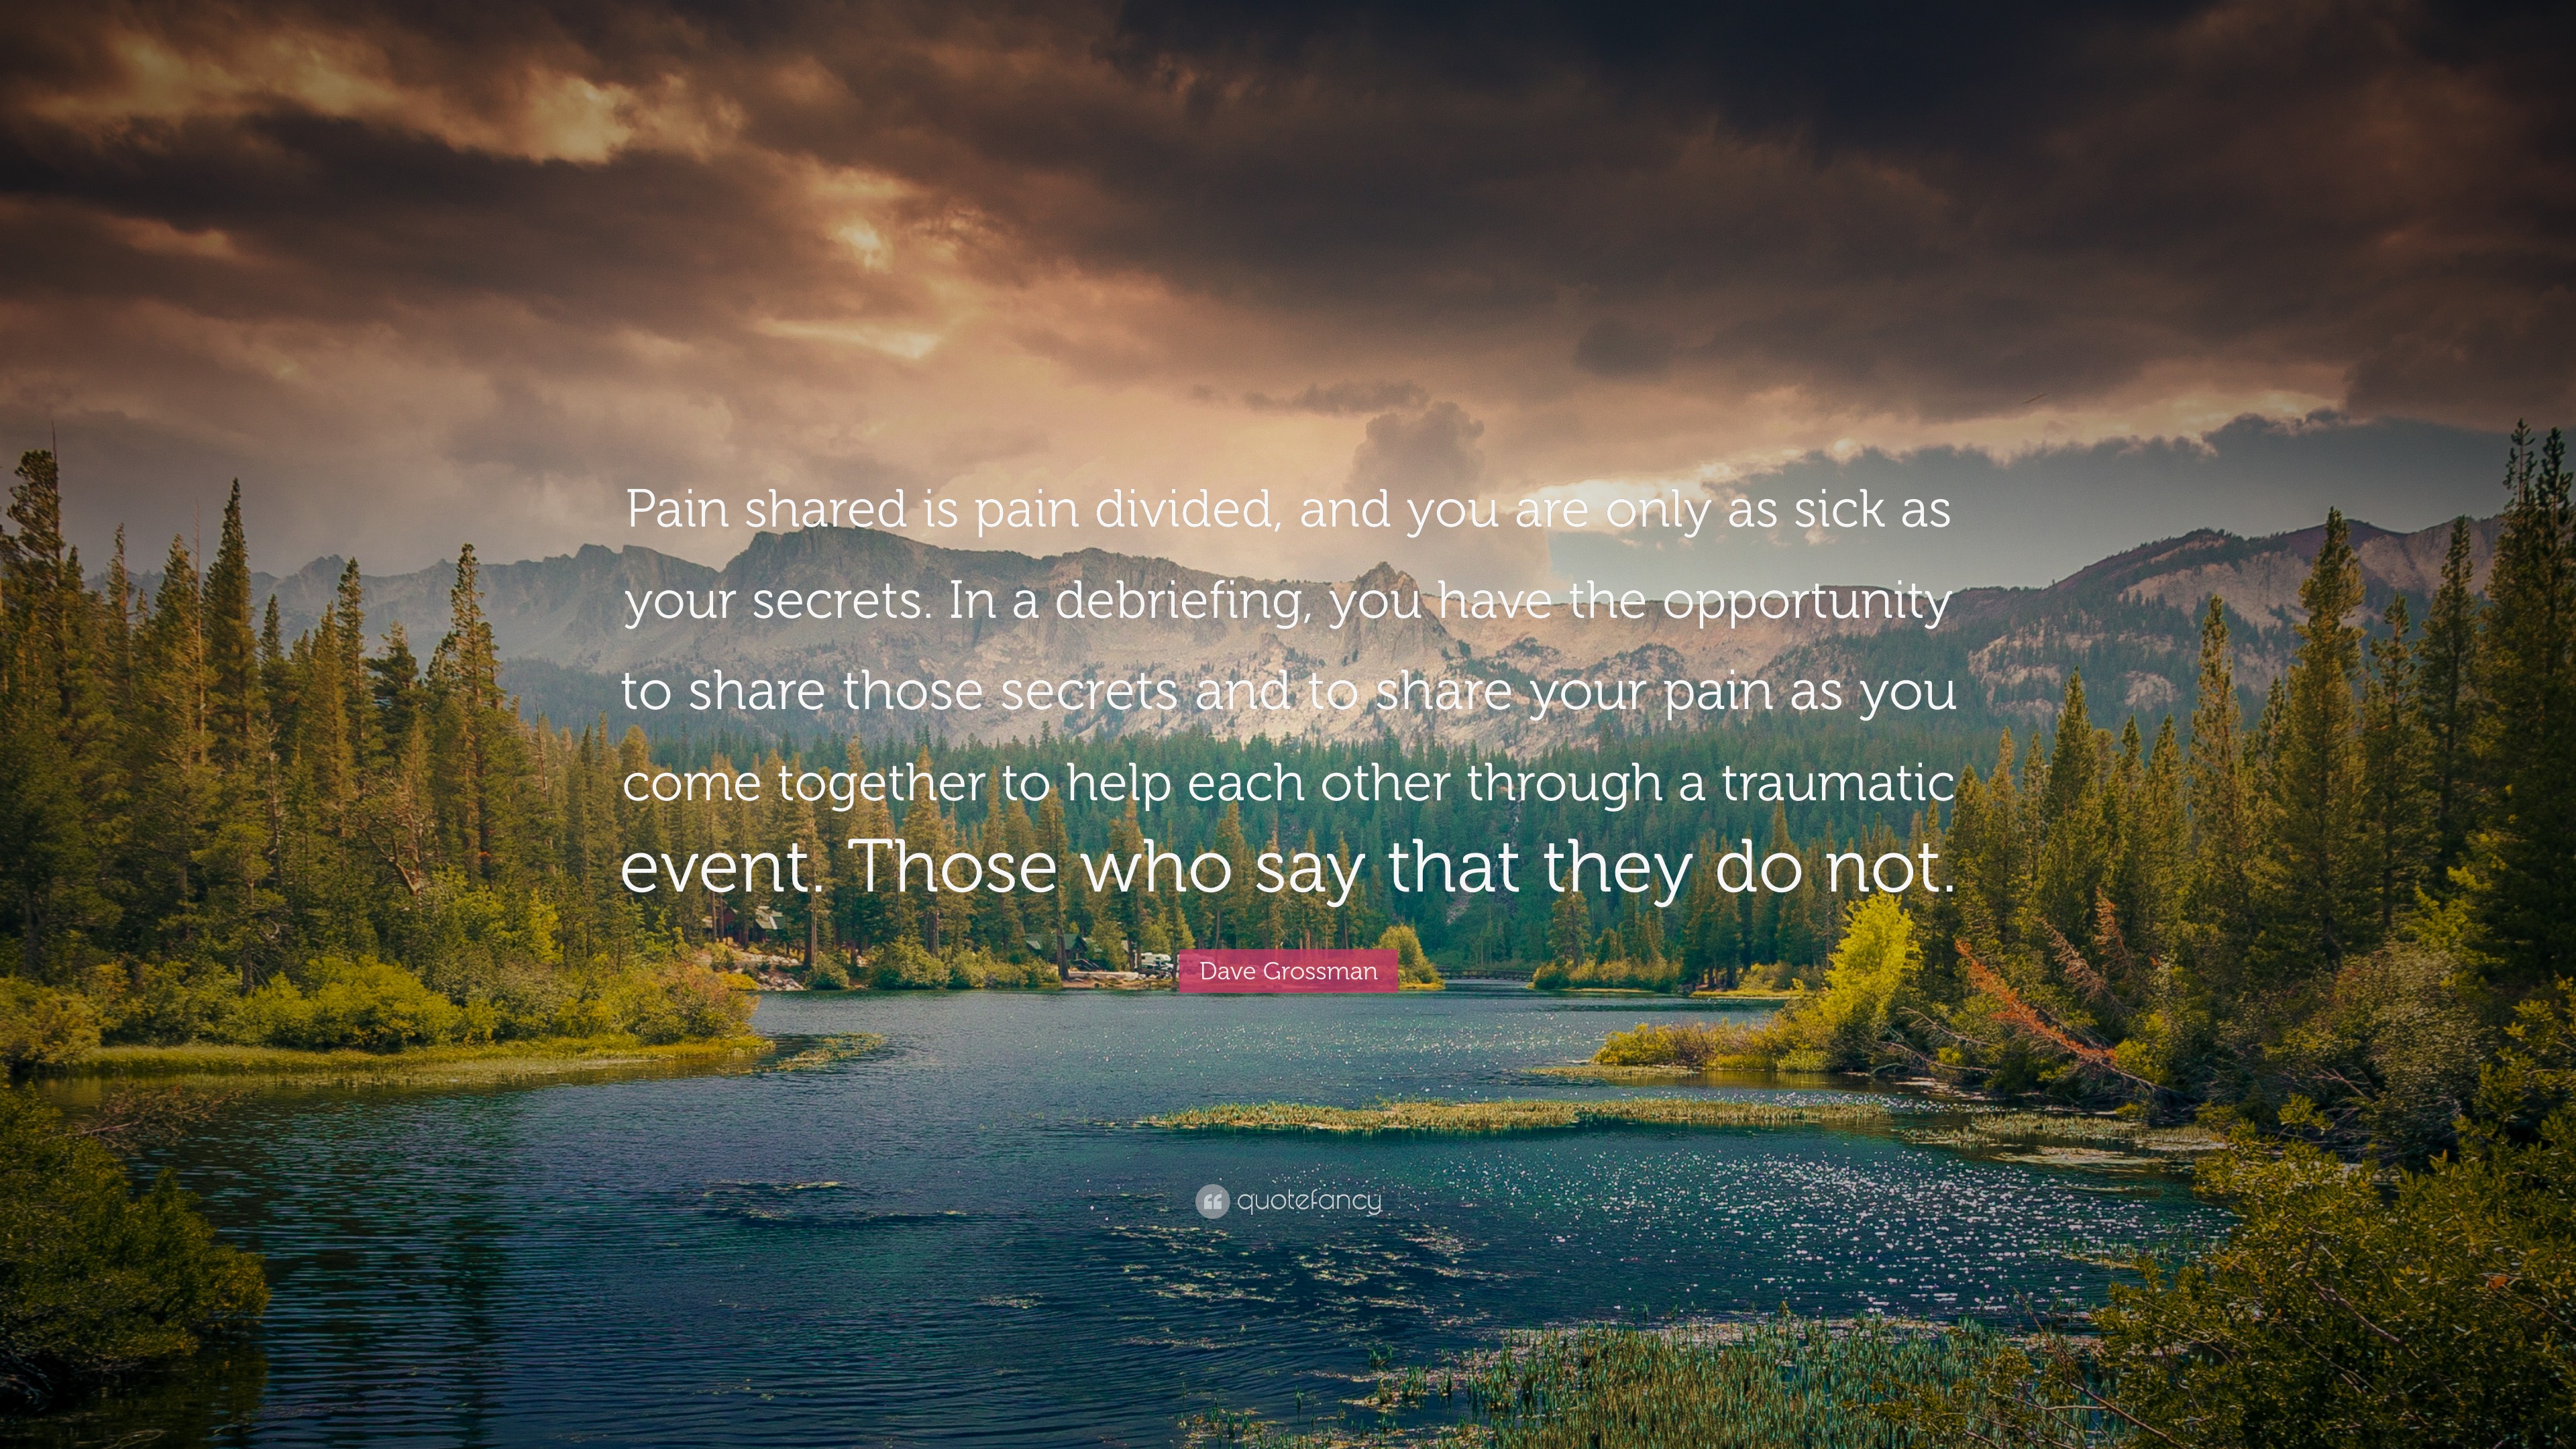 Dave Grossman Quote: “Pain shared is pain divided, and you are only as ...